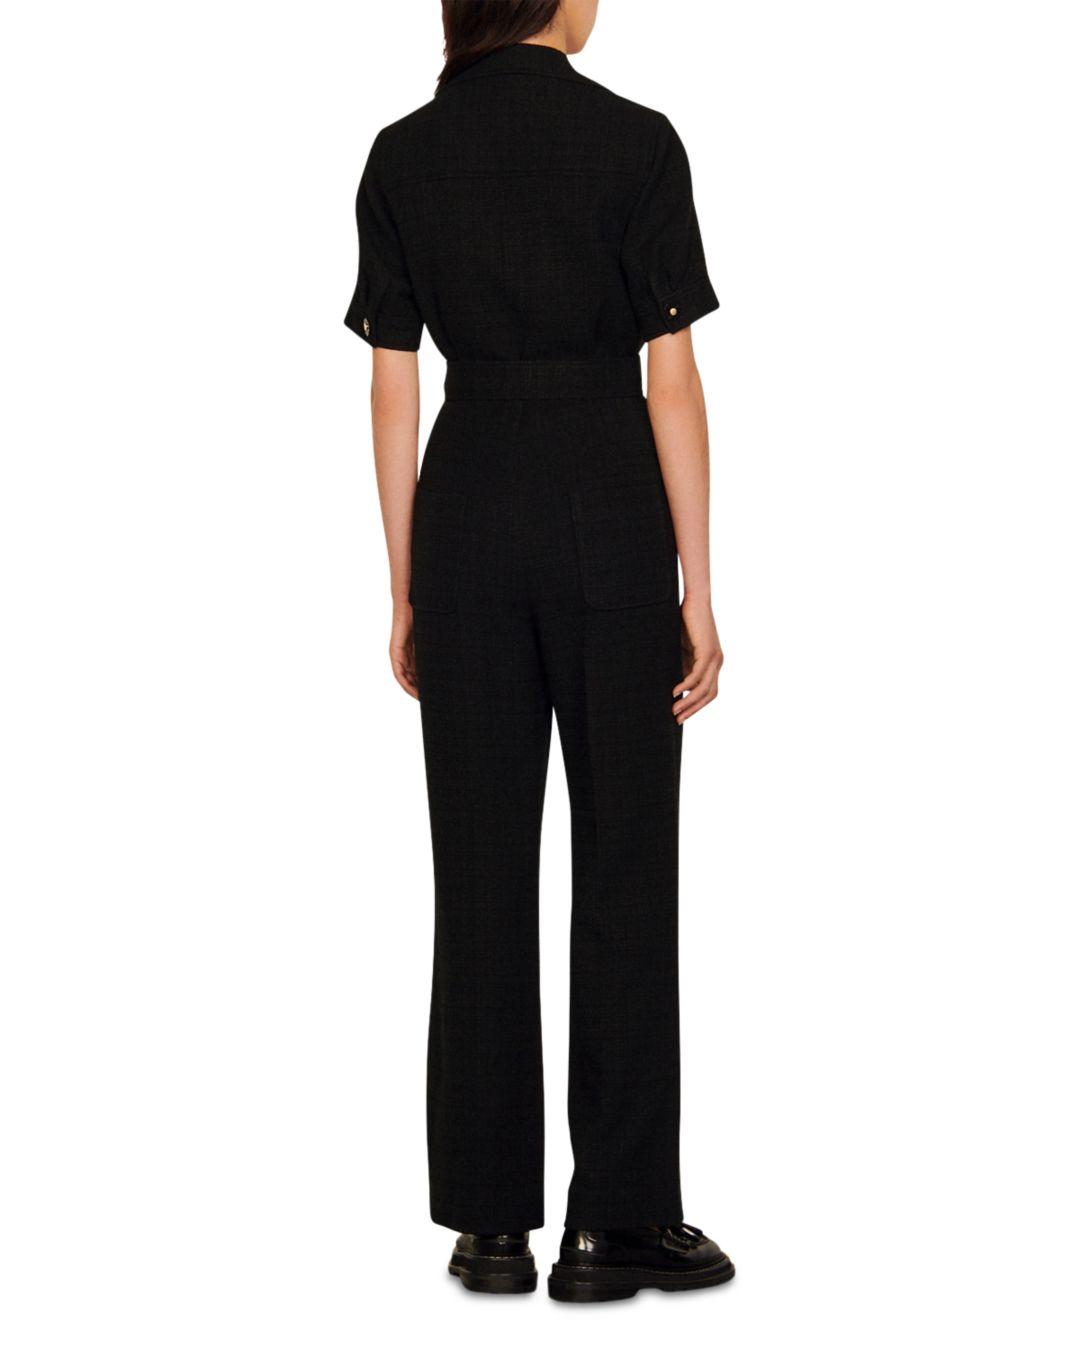 Sandro Nora Belted Zip Front Jumpsuit in Black | Lyst